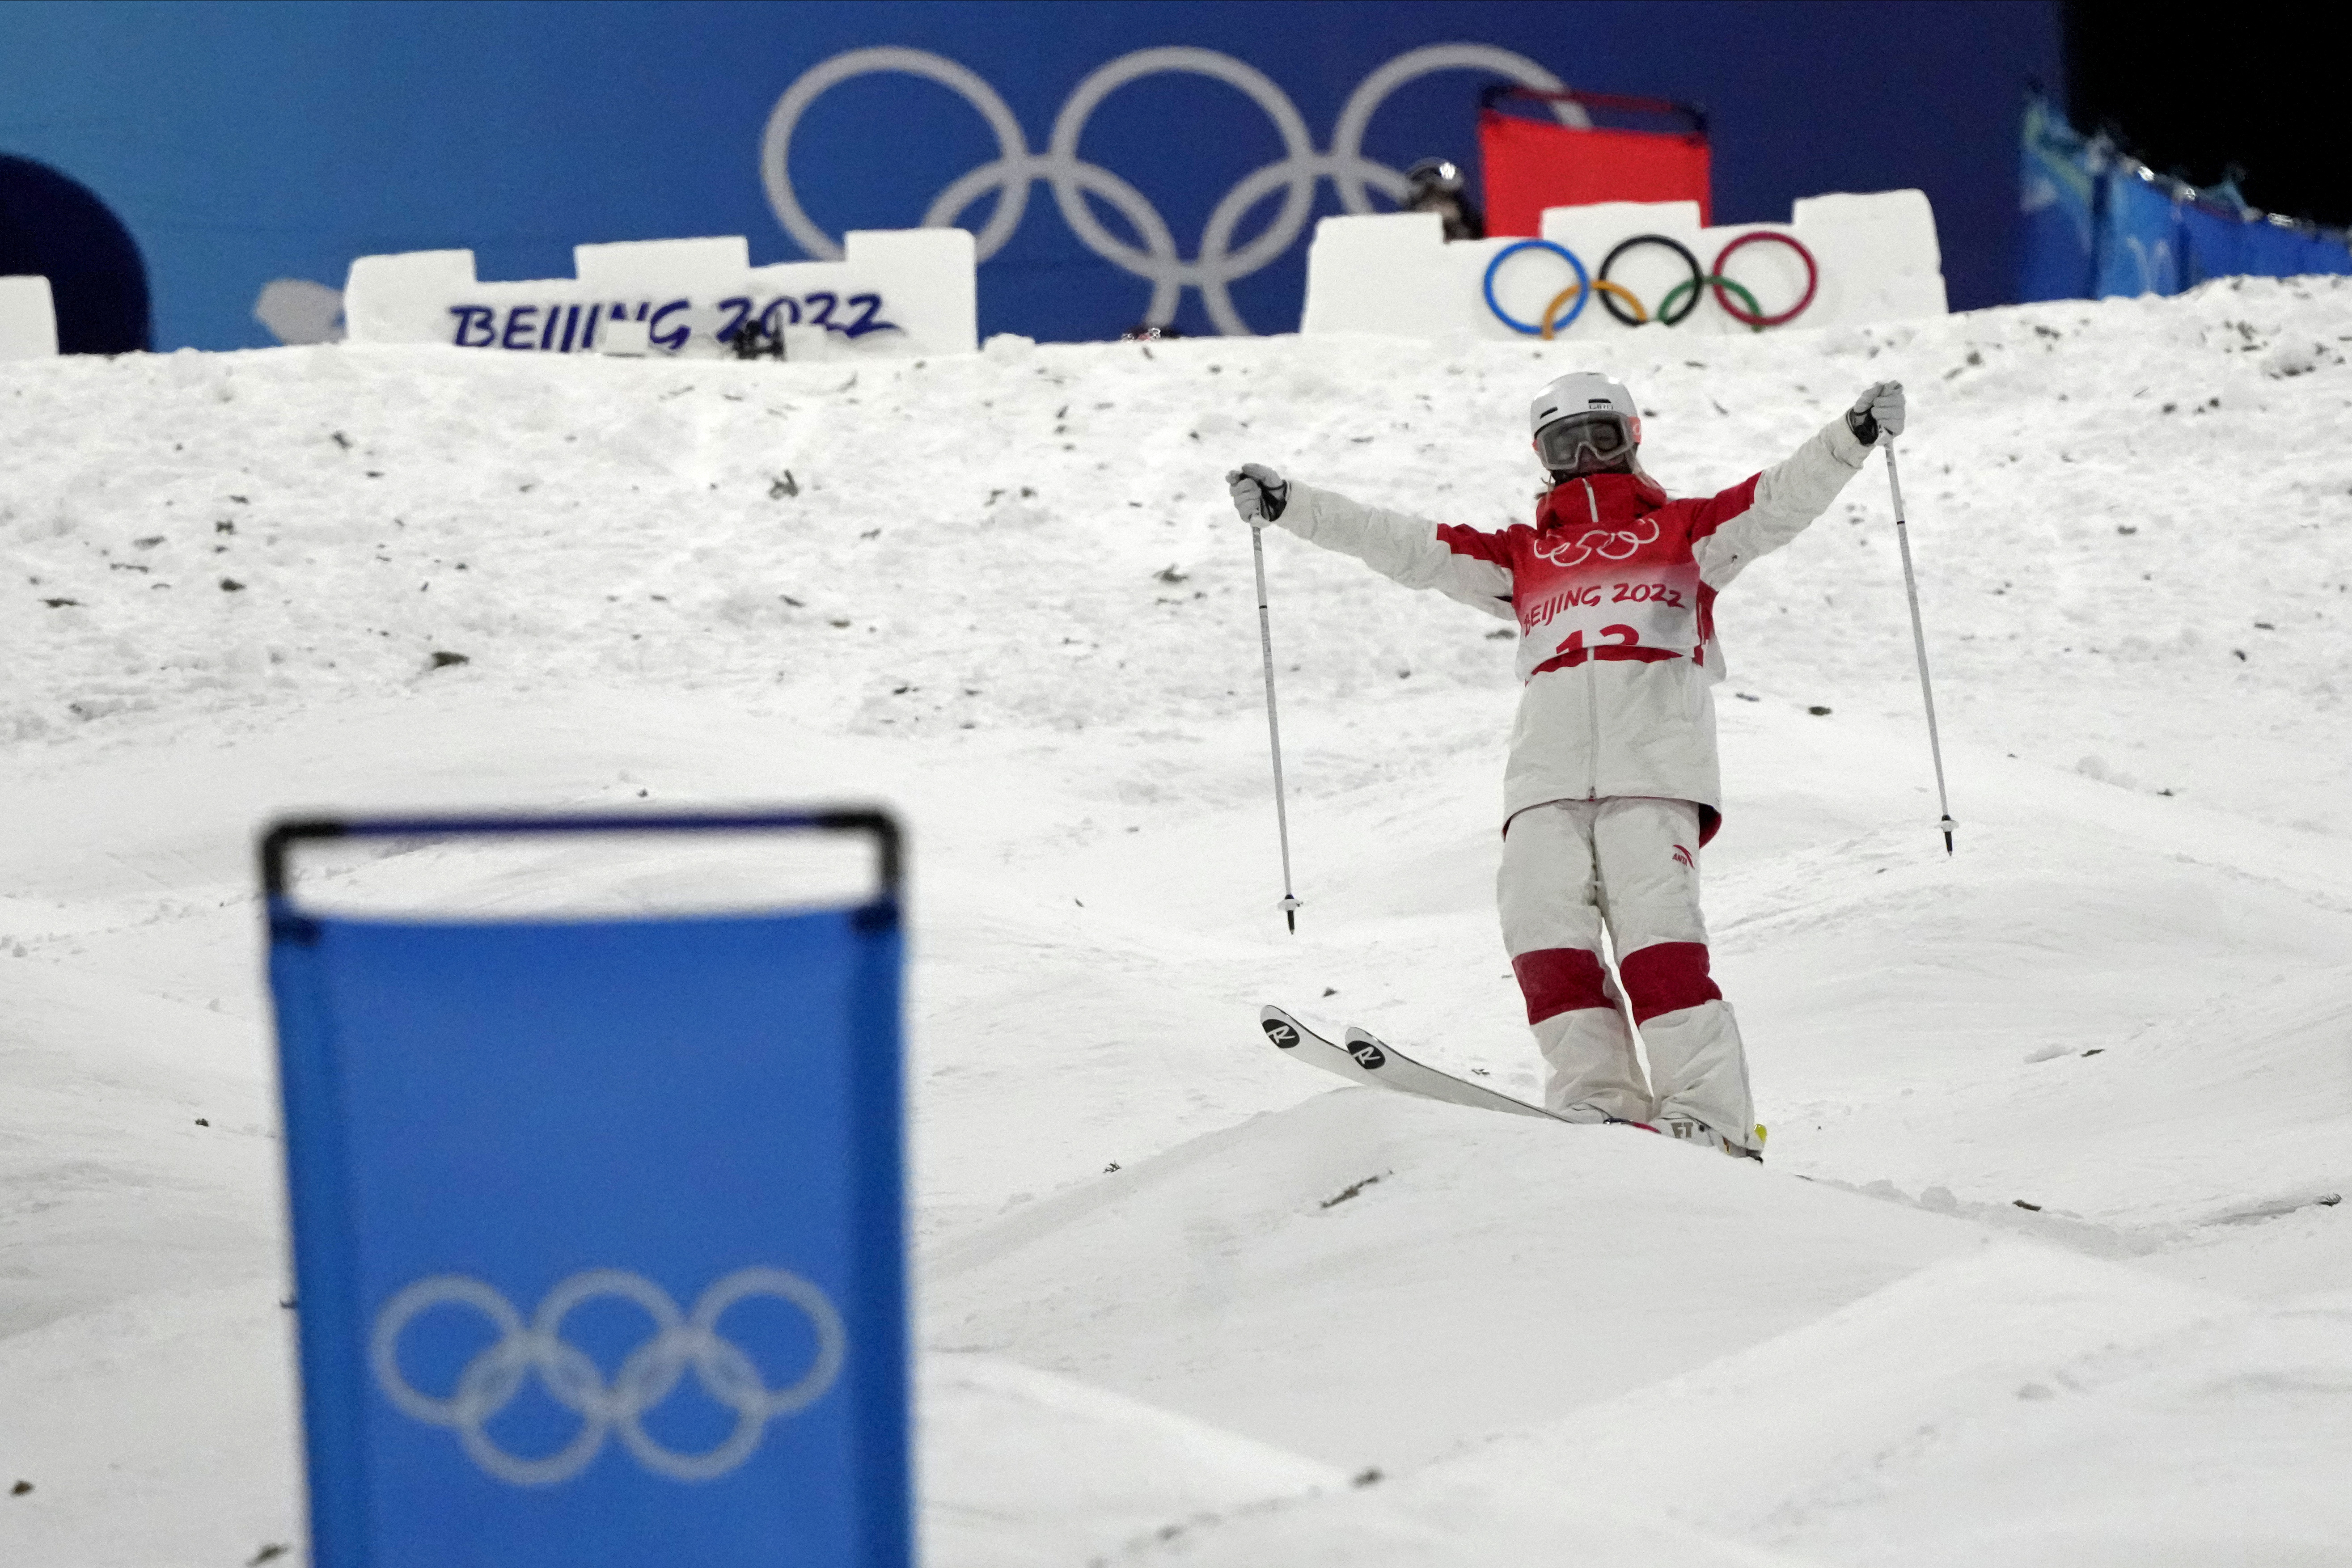 Justine Dufour-Lapointe holds out her arms after standing up from a crash